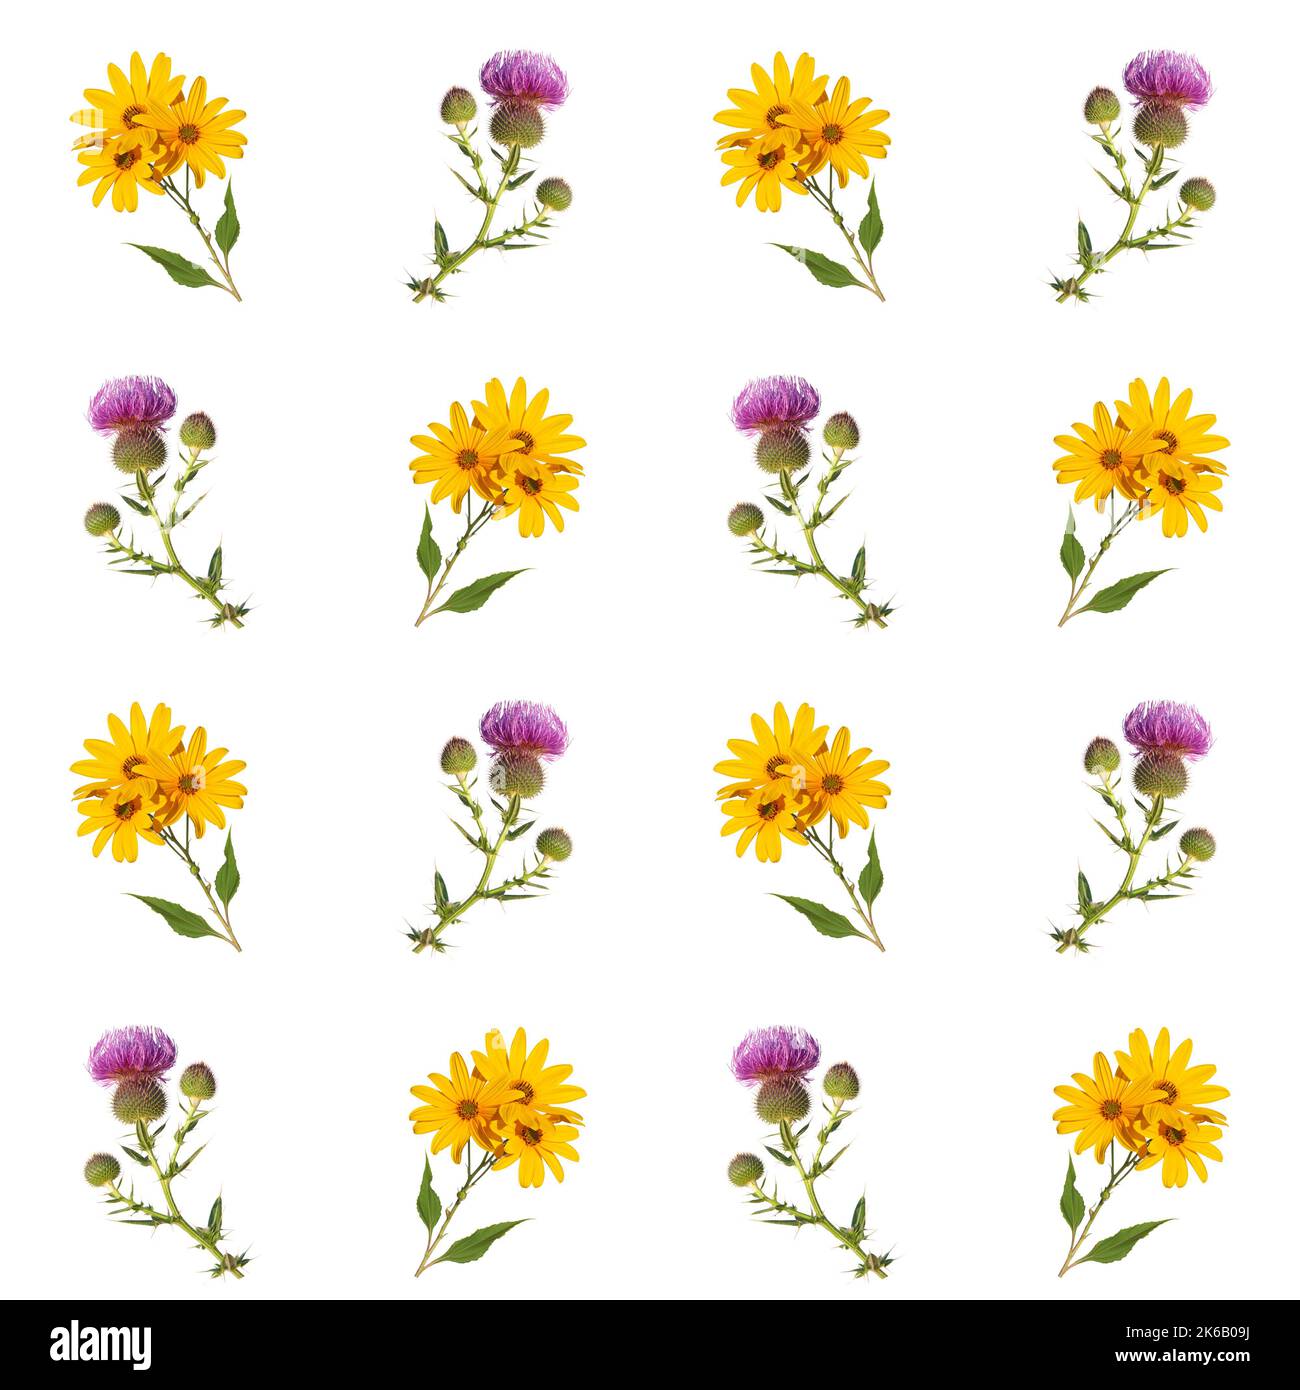 Floral pattern with purple flower of wild thistle and yellow flowers of Jerusalem artichoke on white background Stock Photo